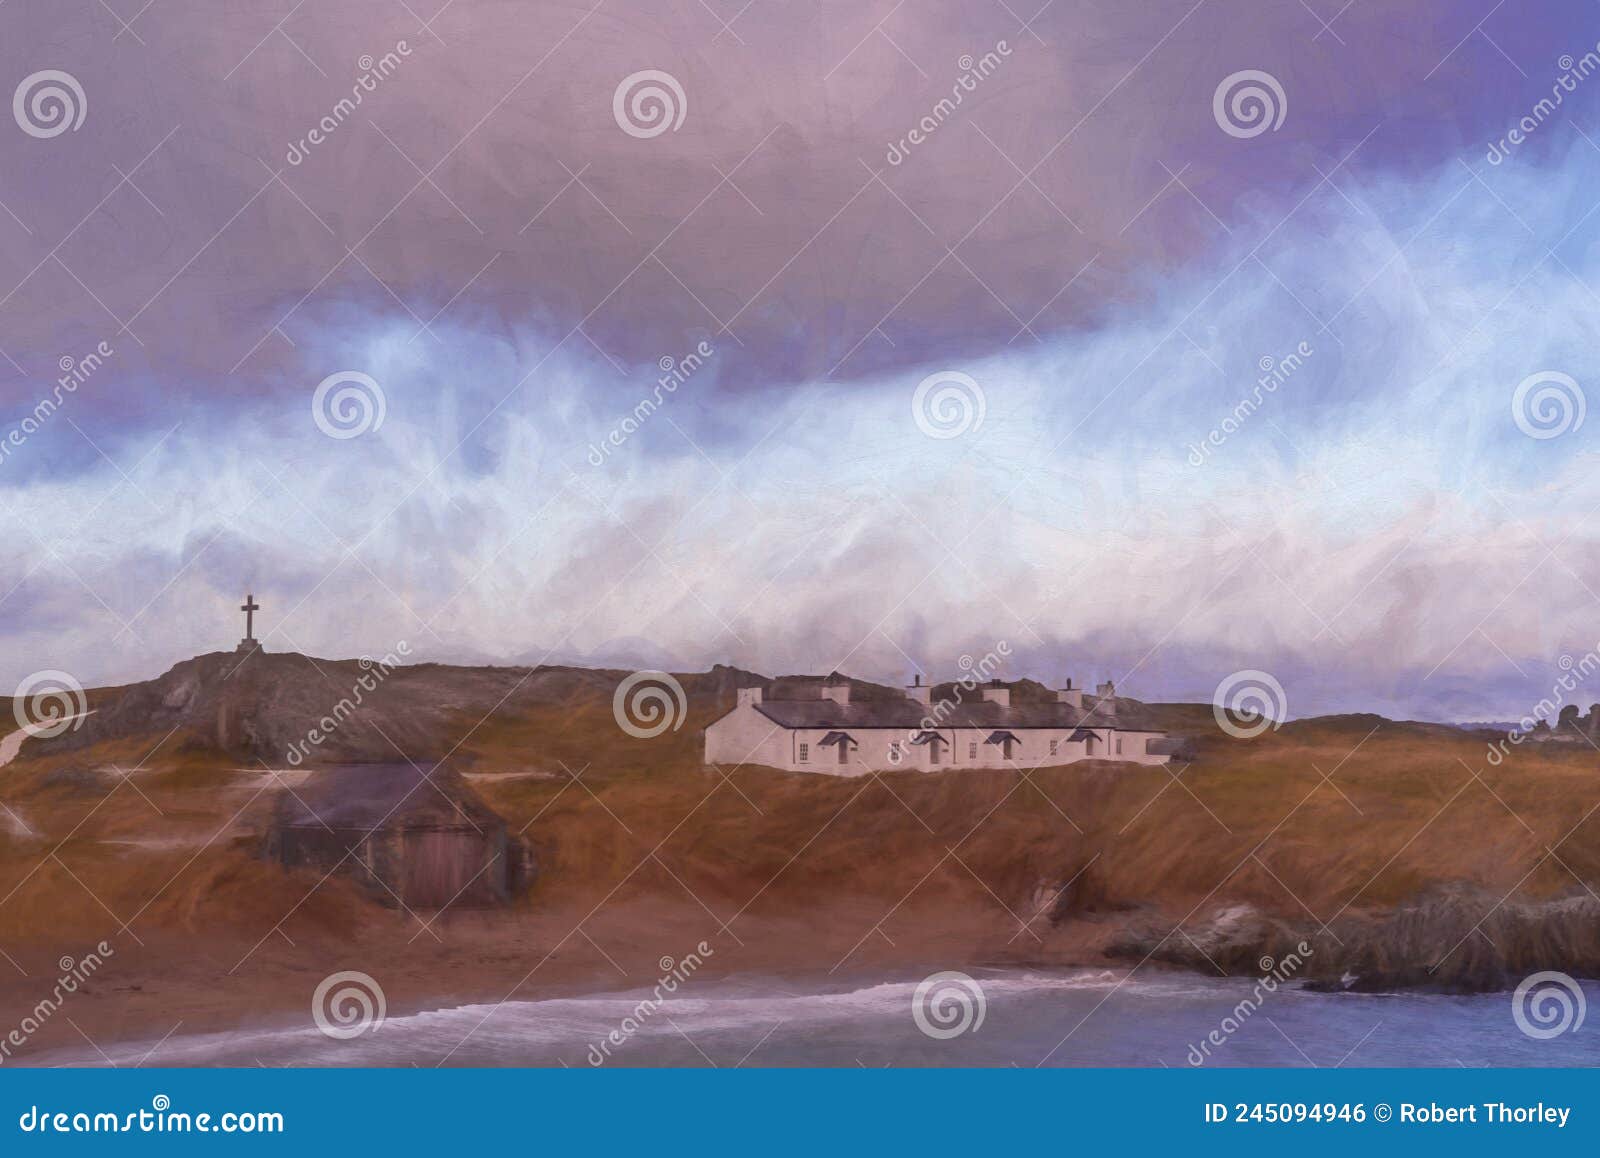 digital painting of the pilot`s cottages and cross at ynys llanddwyn on anglesey, north wales